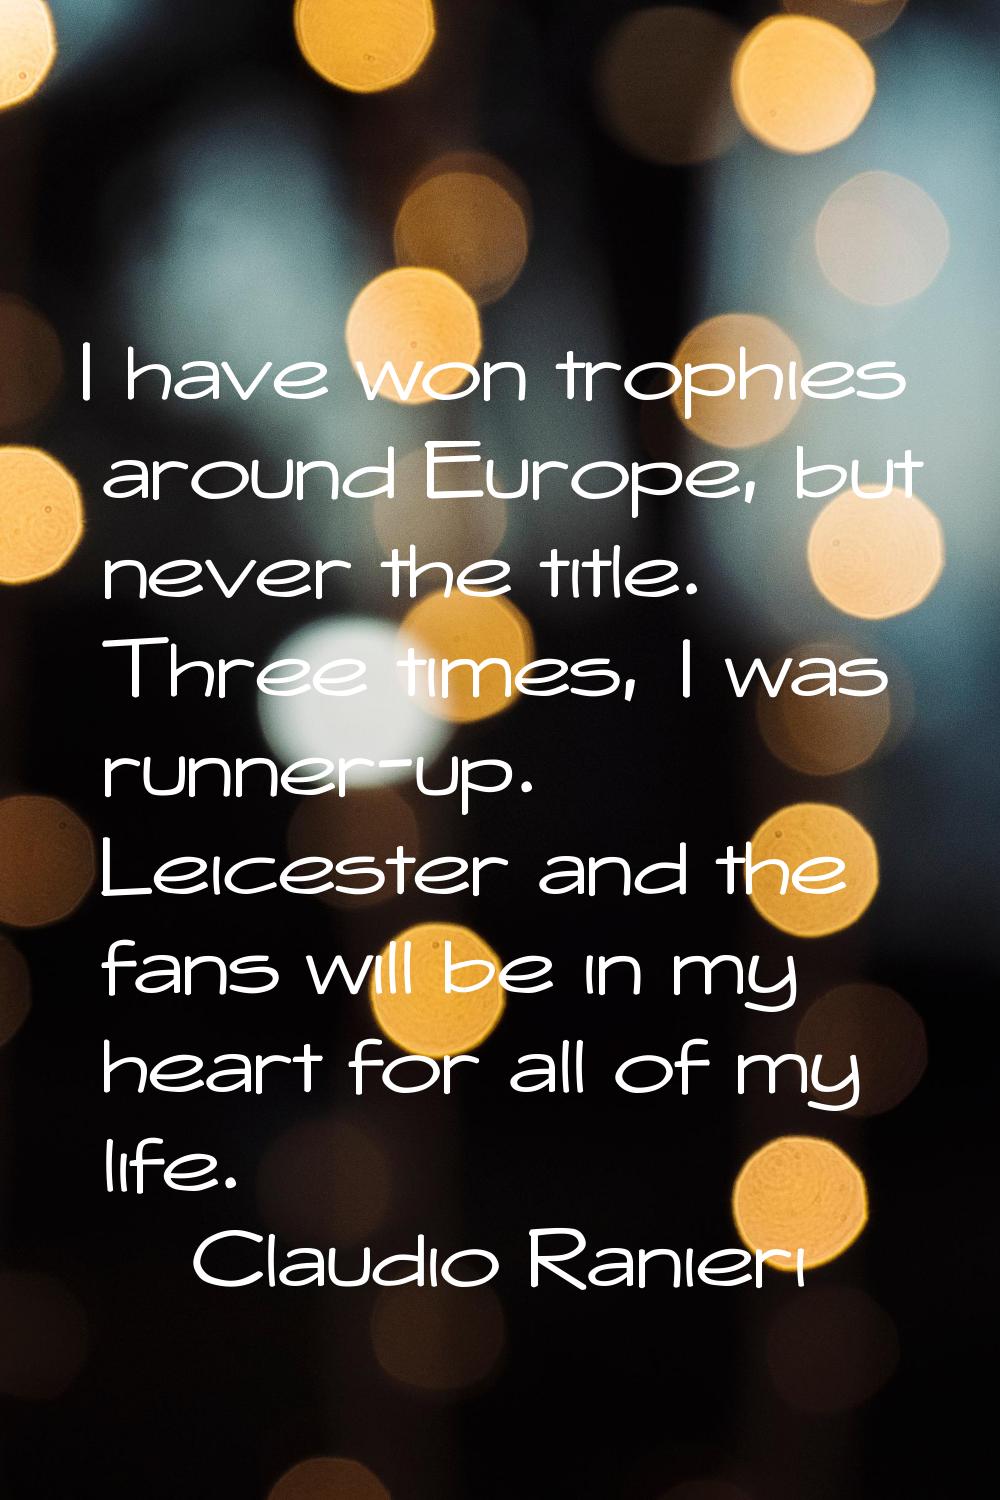 I have won trophies around Europe, but never the title. Three times, I was runner-up. Leicester and